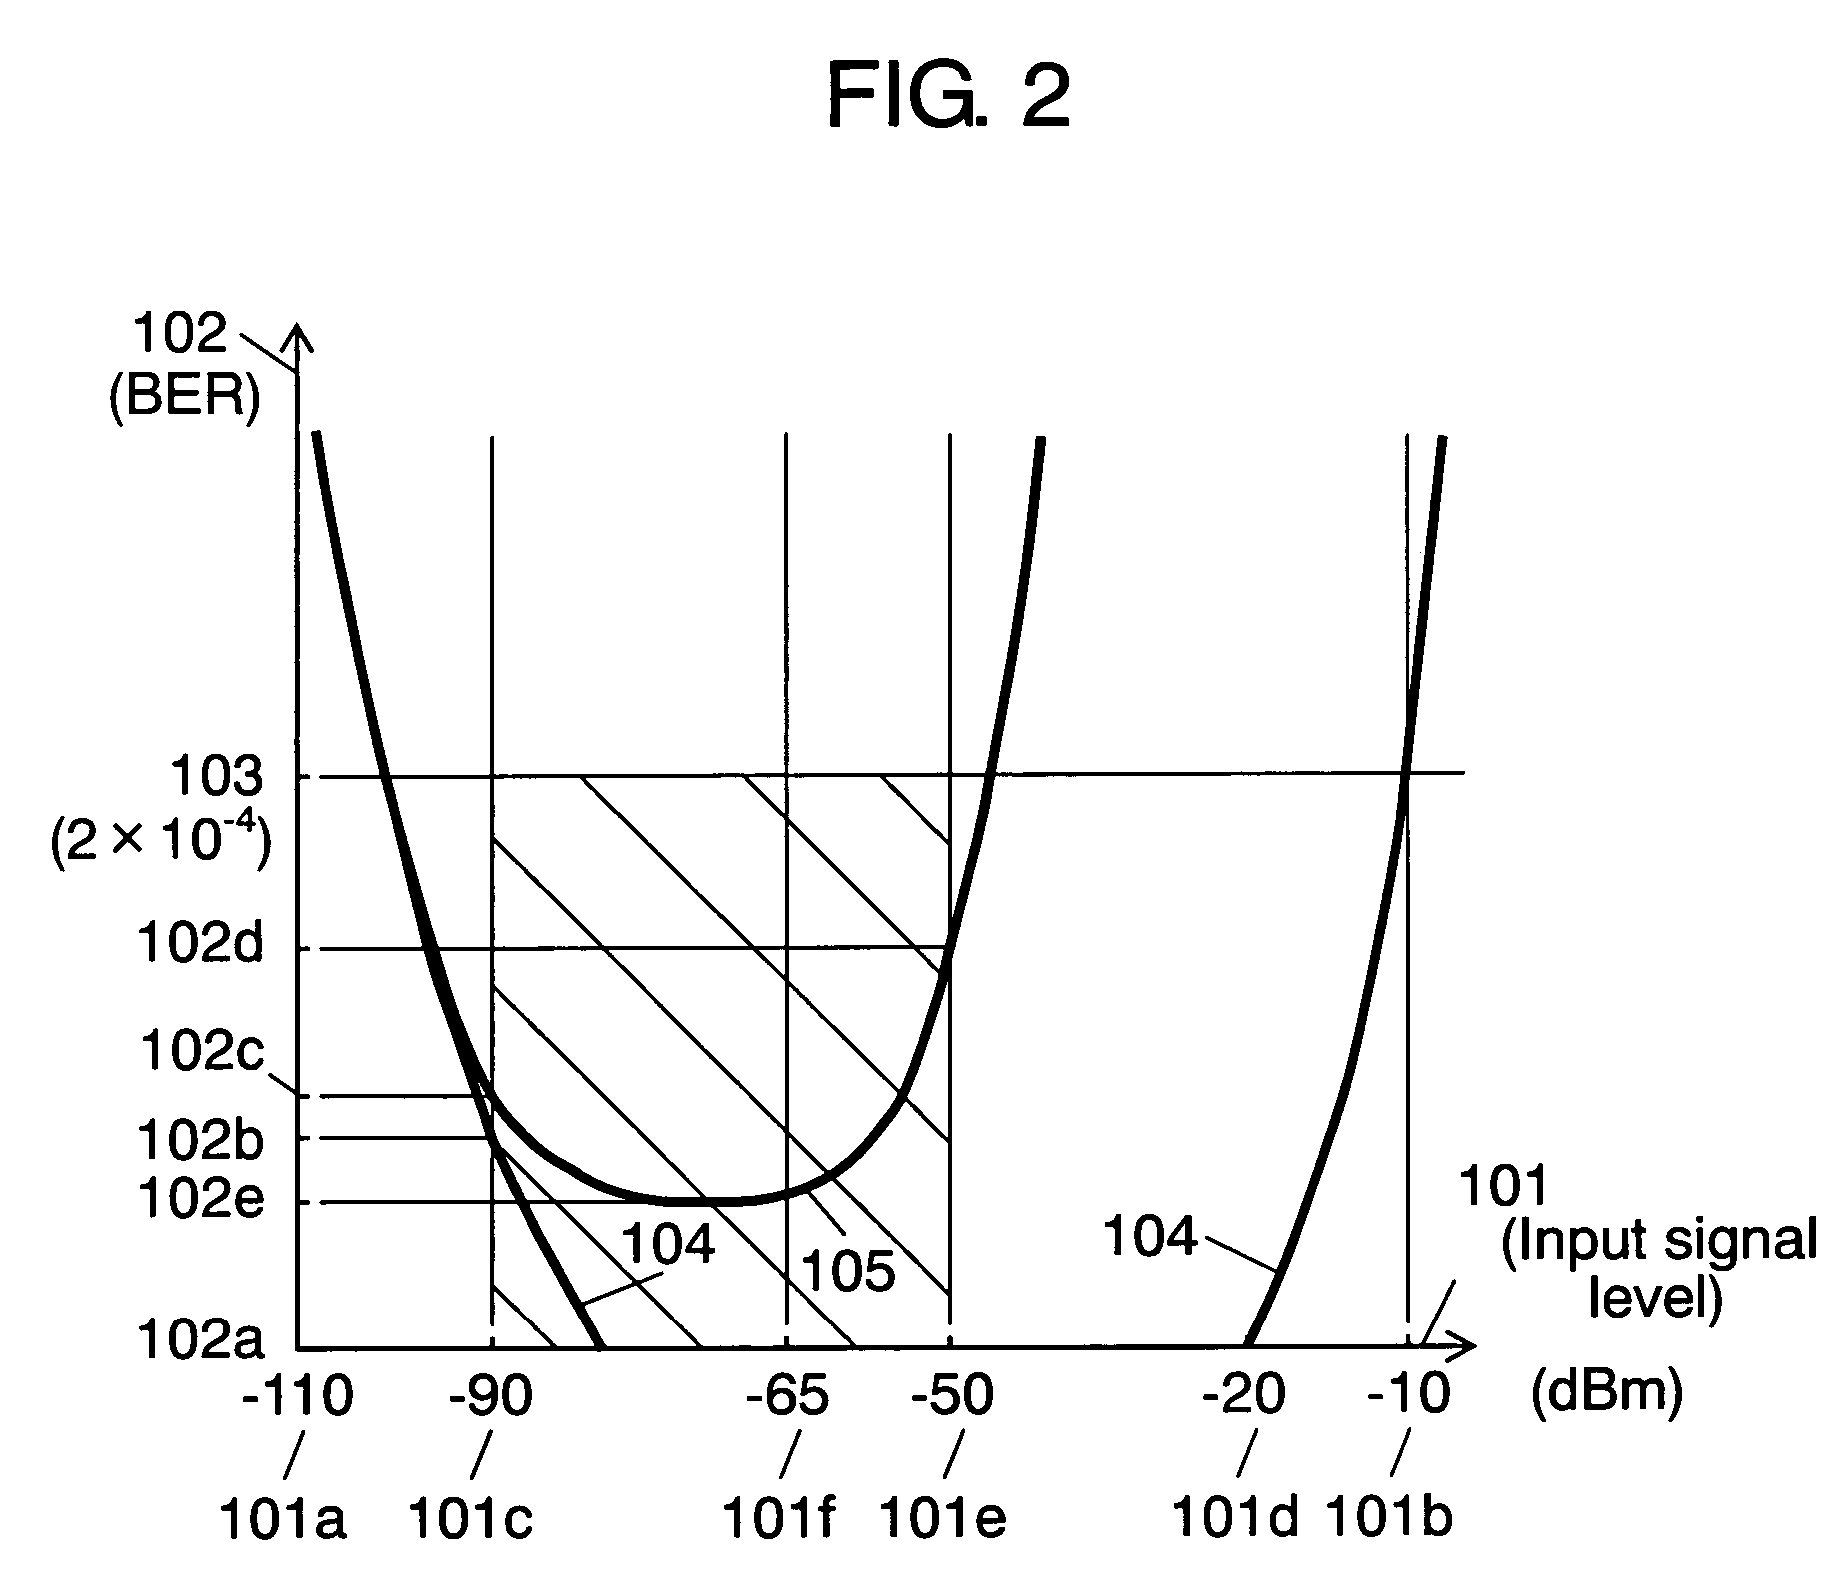 High-frequency receiver having a gain switch controller